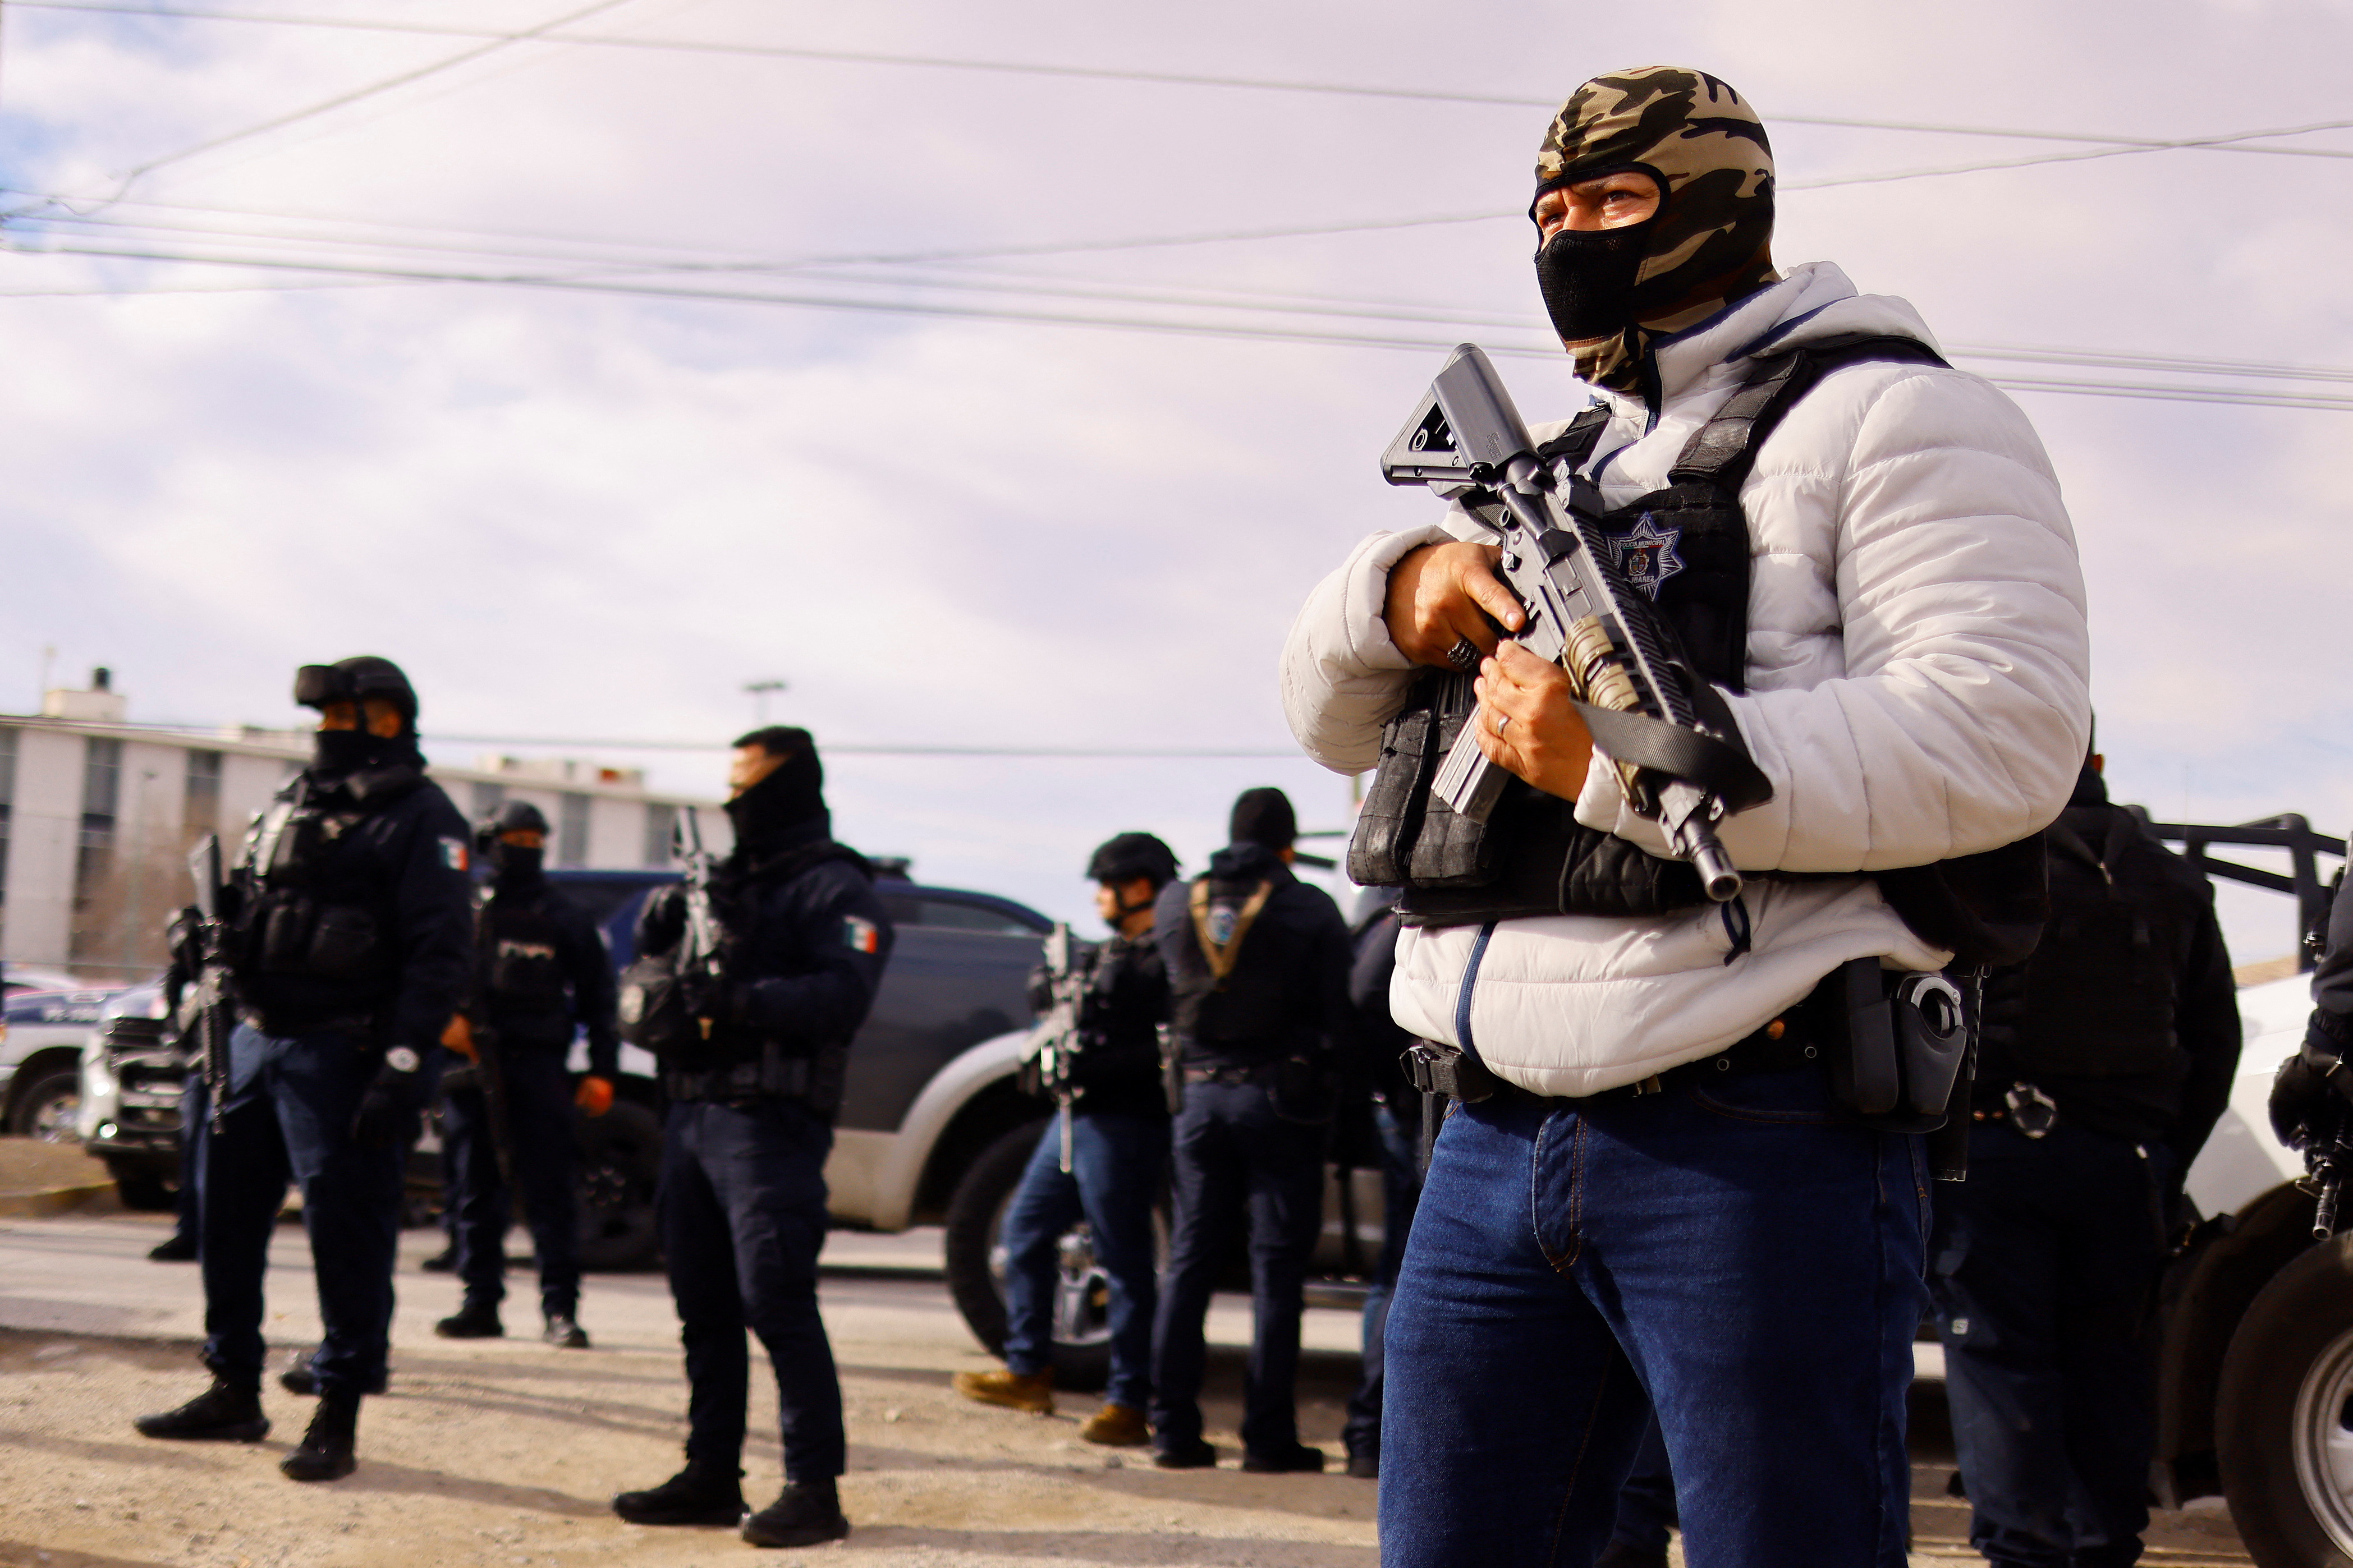 Security forces arrive to the Cereso number 3 state prison after unknown assailants entered the prison and freed several inmates, resulting in injuries and deaths, in Ciudad Juarez